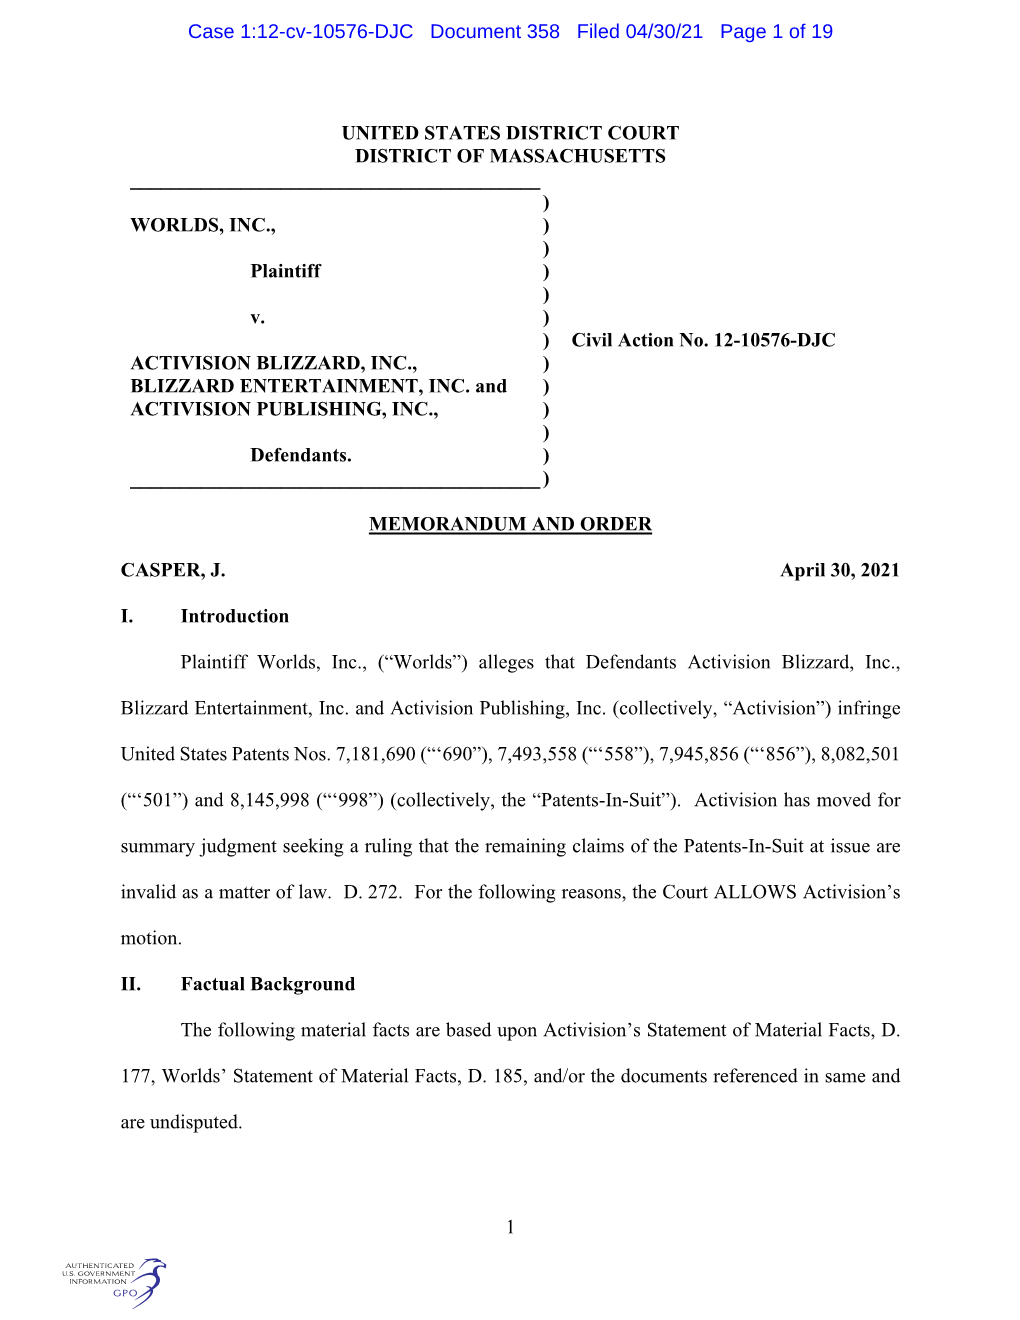 Case 1:12-Cv-10576-DJC Document 358 Filed 04/30/21 Page 1 of 19